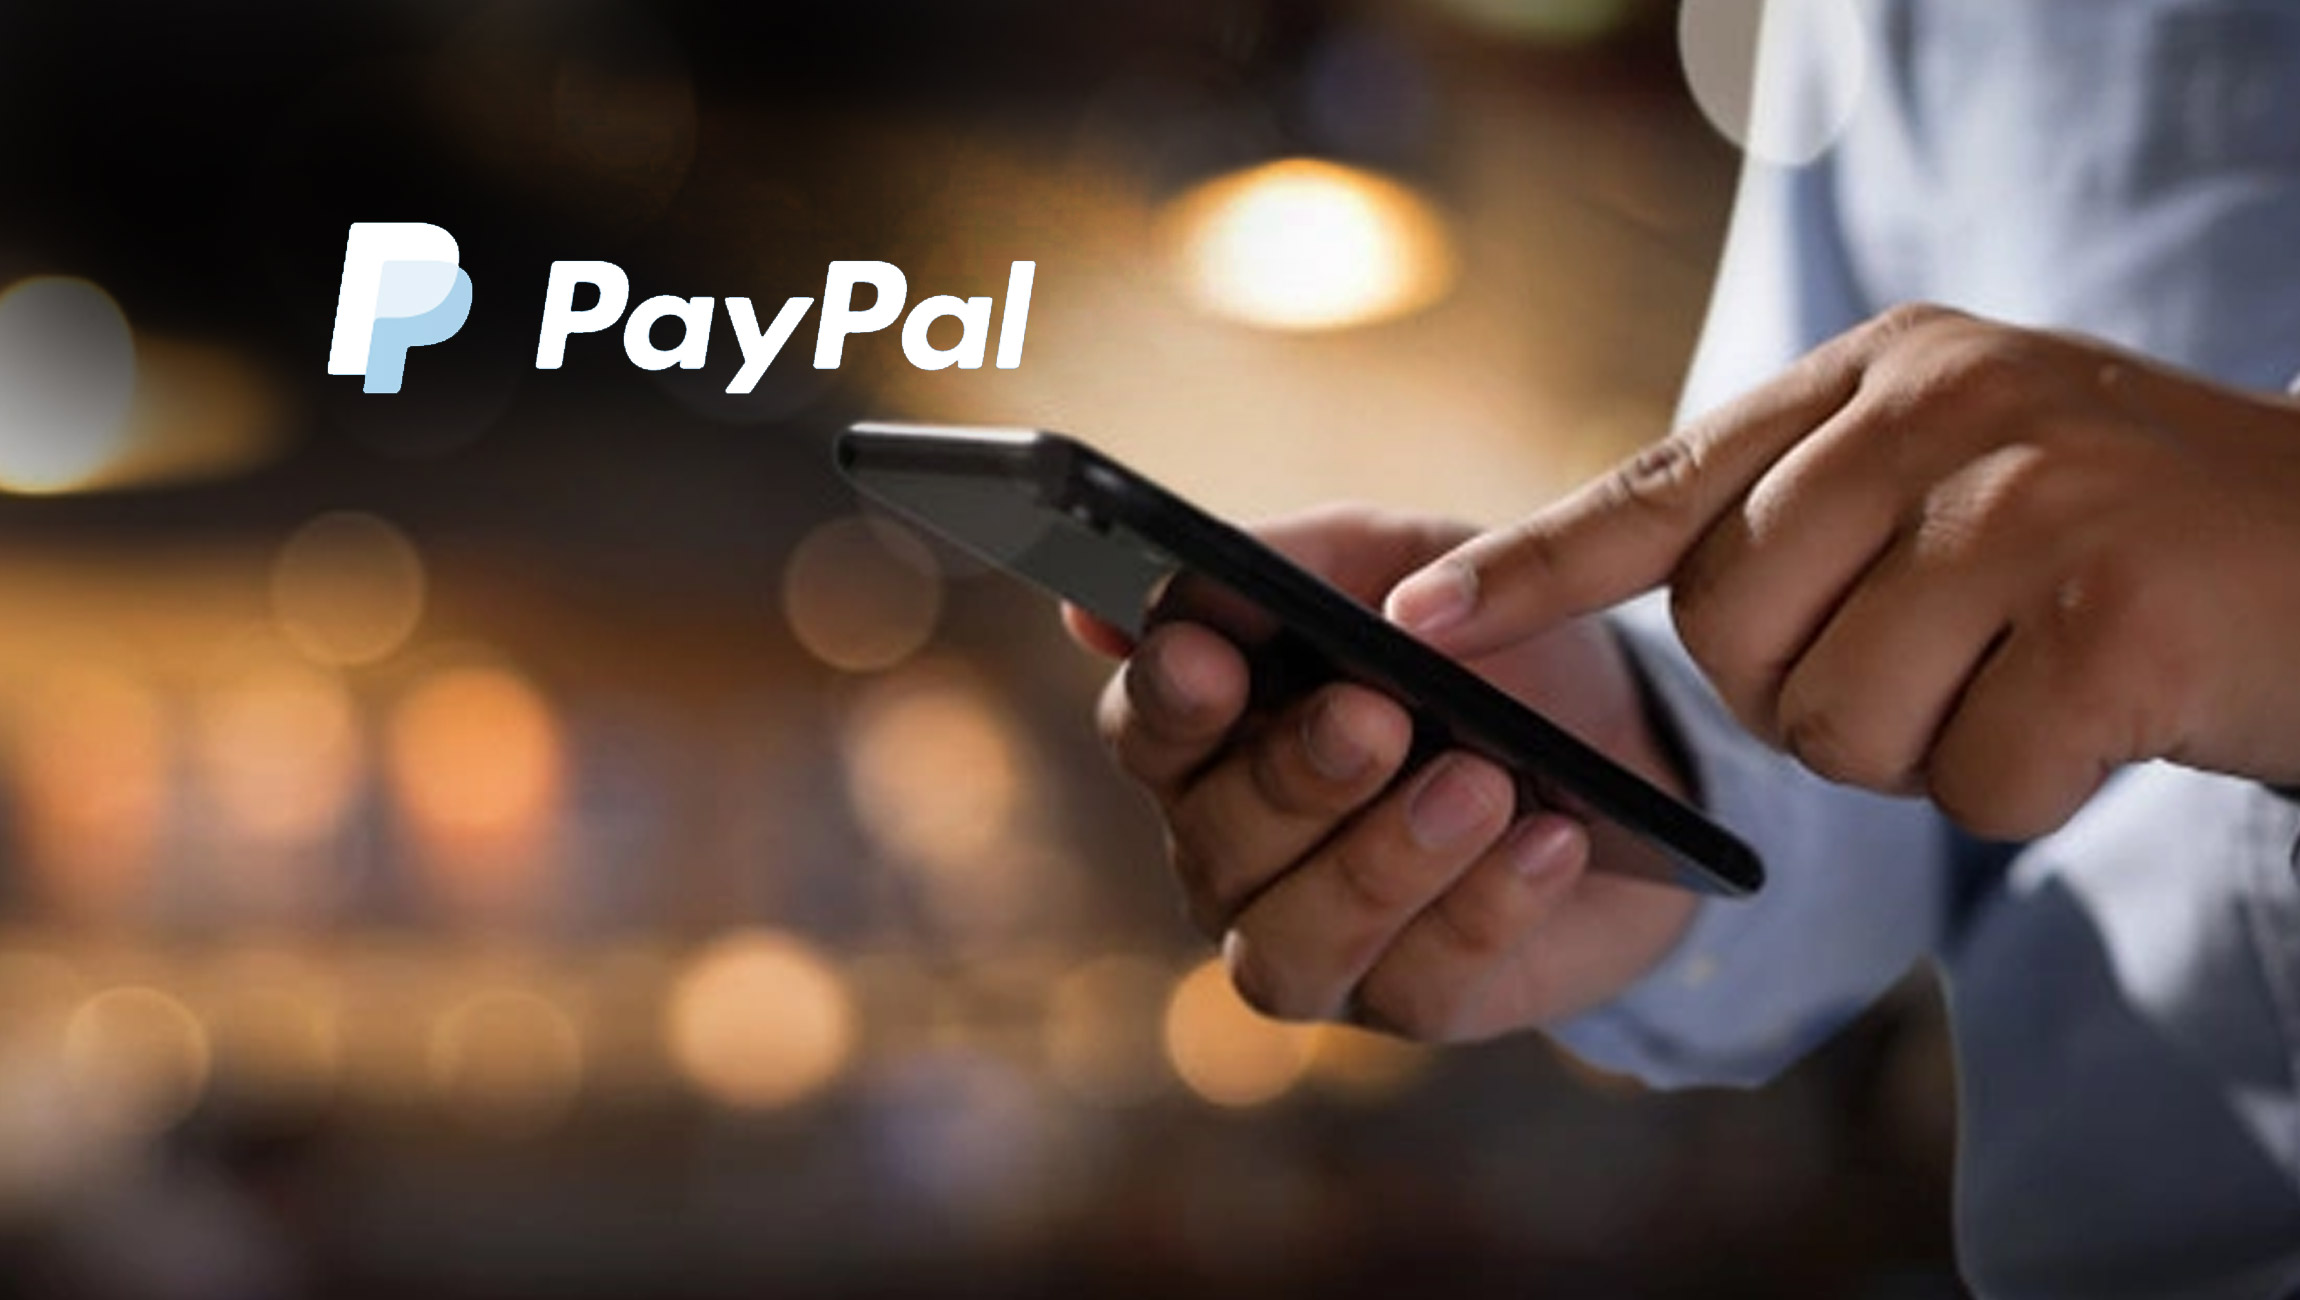 PayPal-Brings-PayPal-Zettle-to-the-U.S.----Its-Digital-In-Person-and-Omnichannel-Solution